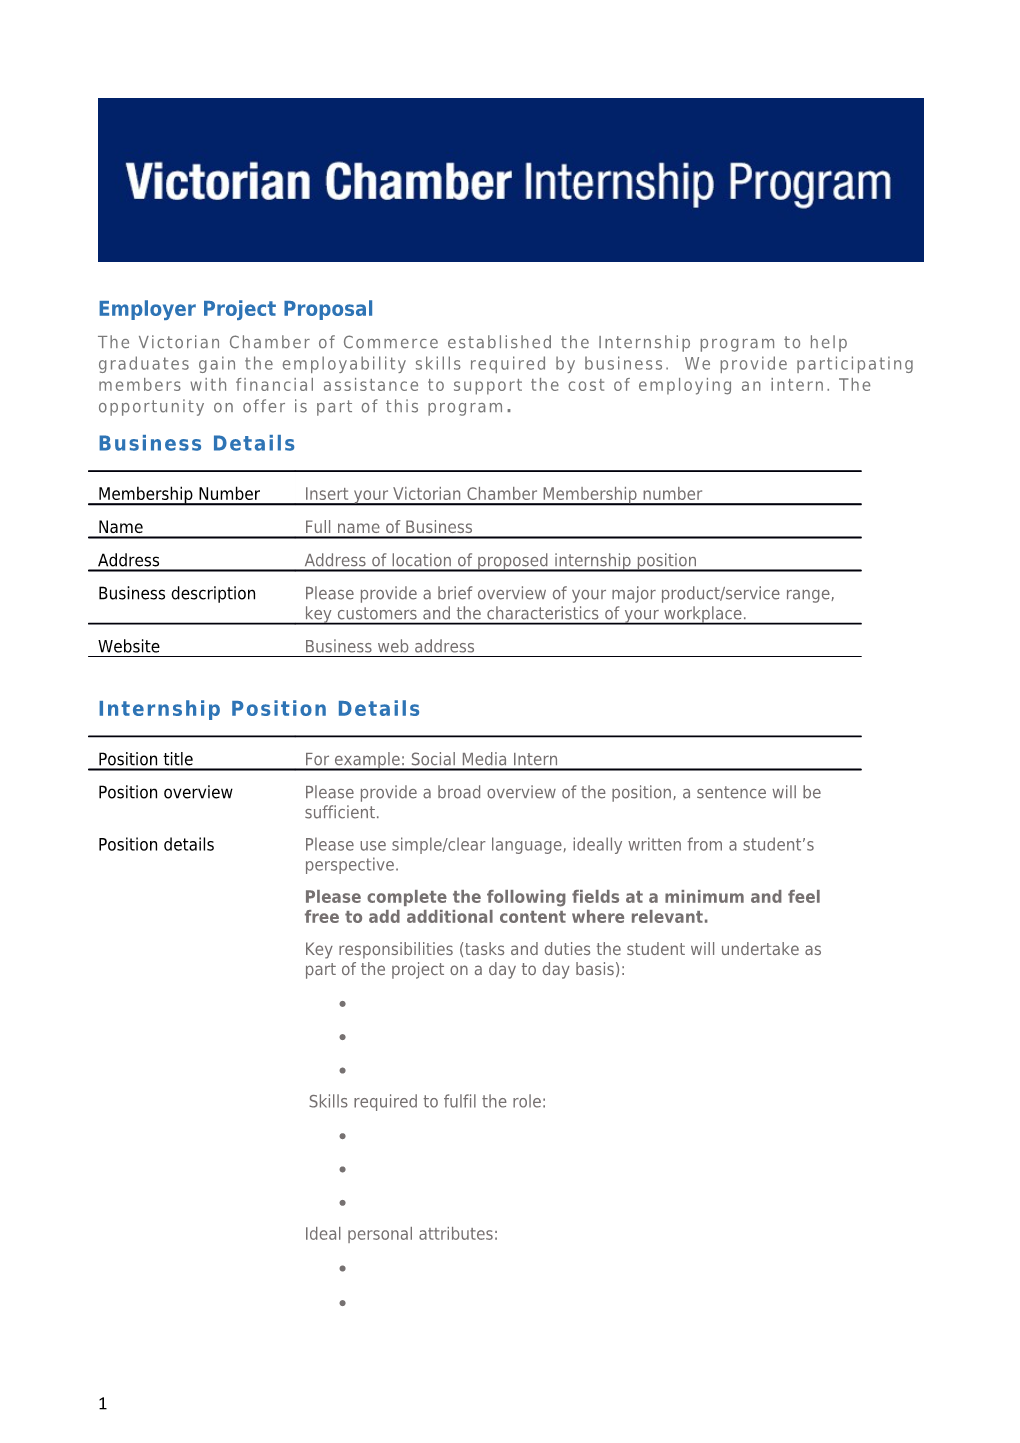 Employer Project Proposal